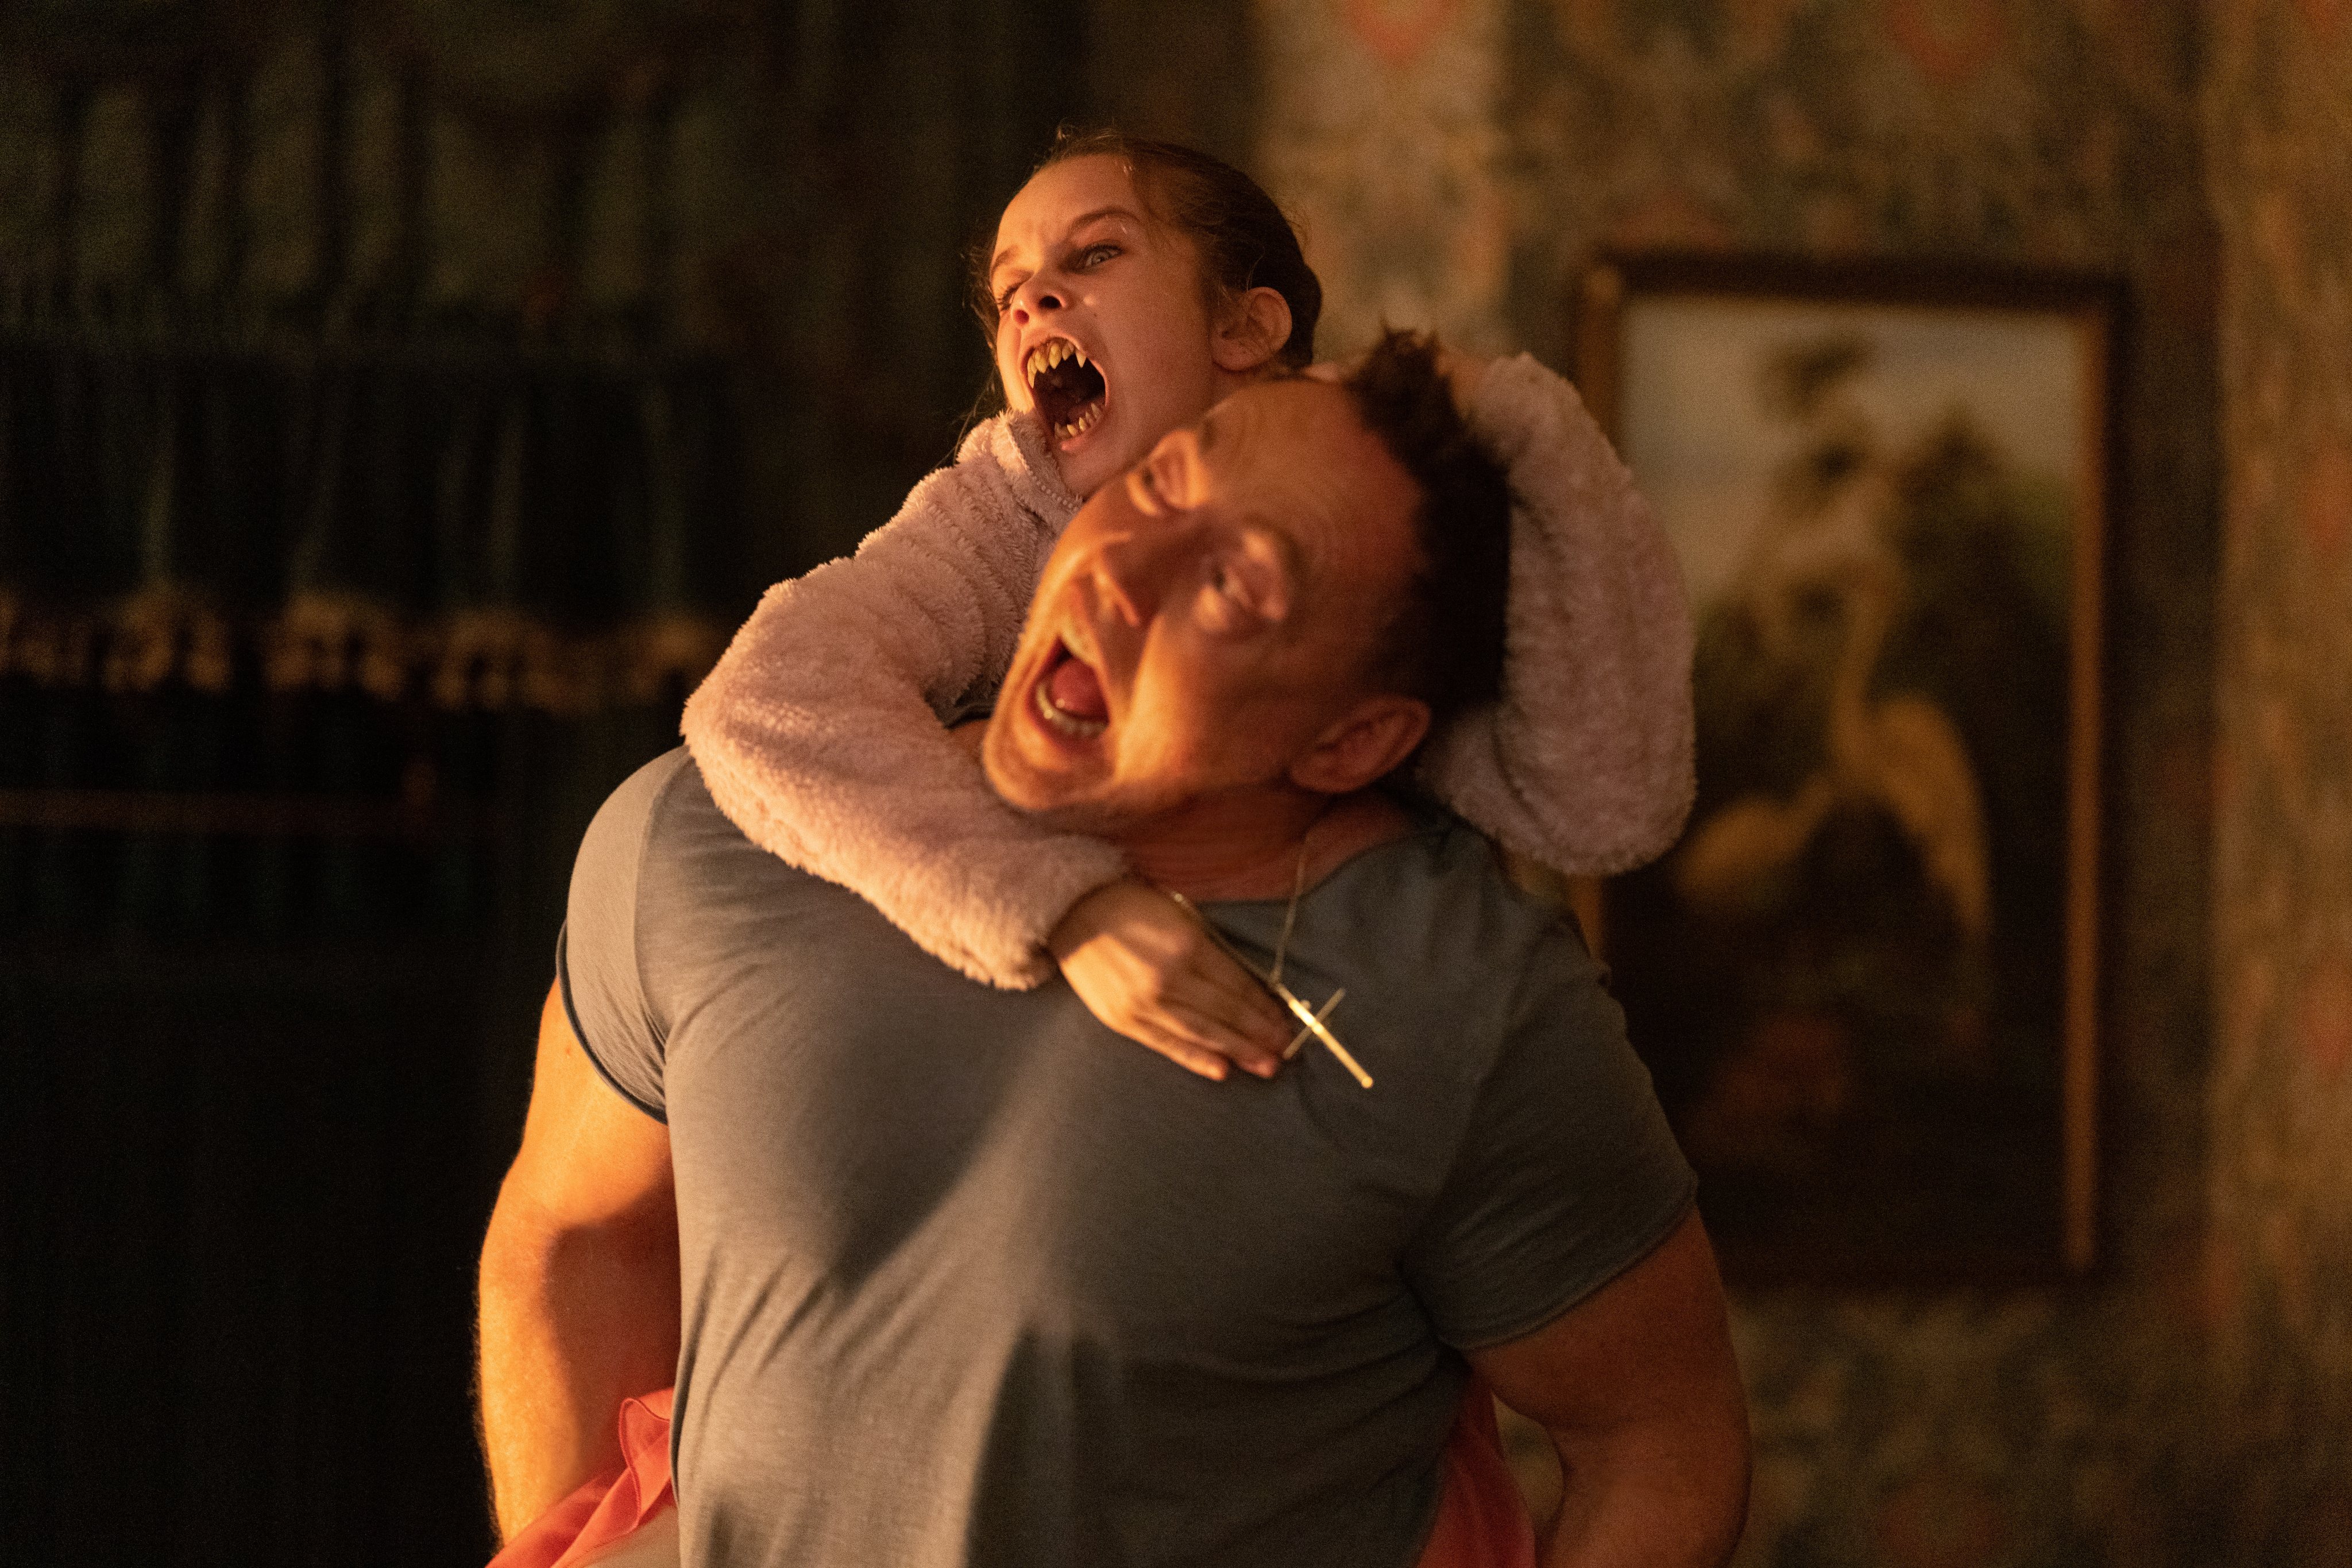 Alisha Weir (top) and Kevin Durand in a still from Abigail.